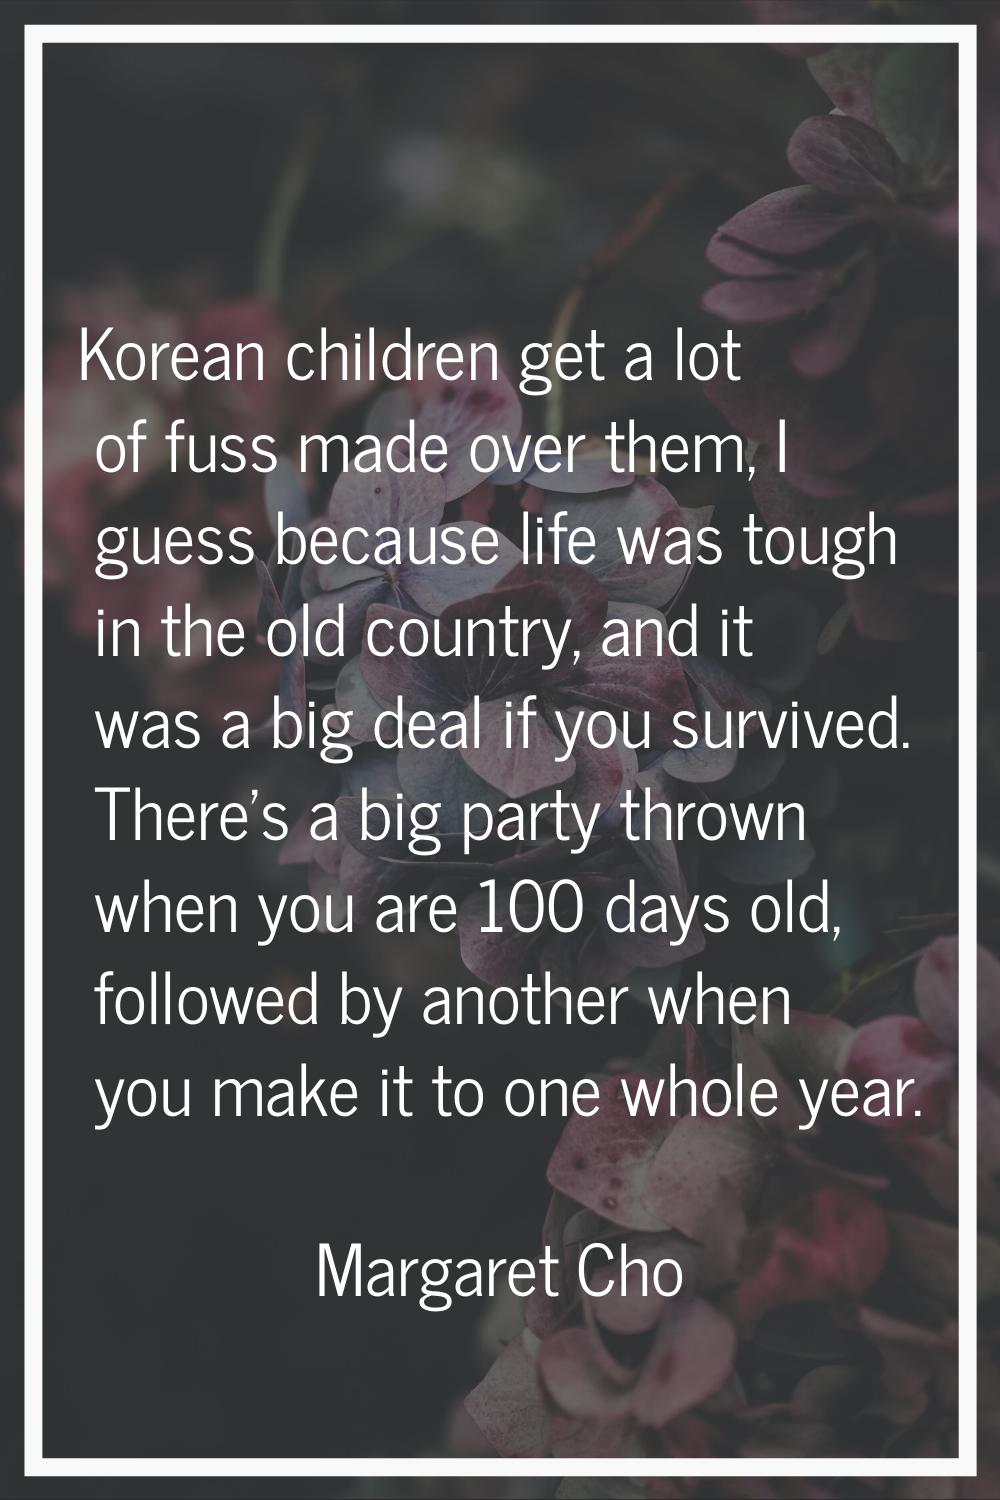 Korean children get a lot of fuss made over them, I guess because life was tough in the old country